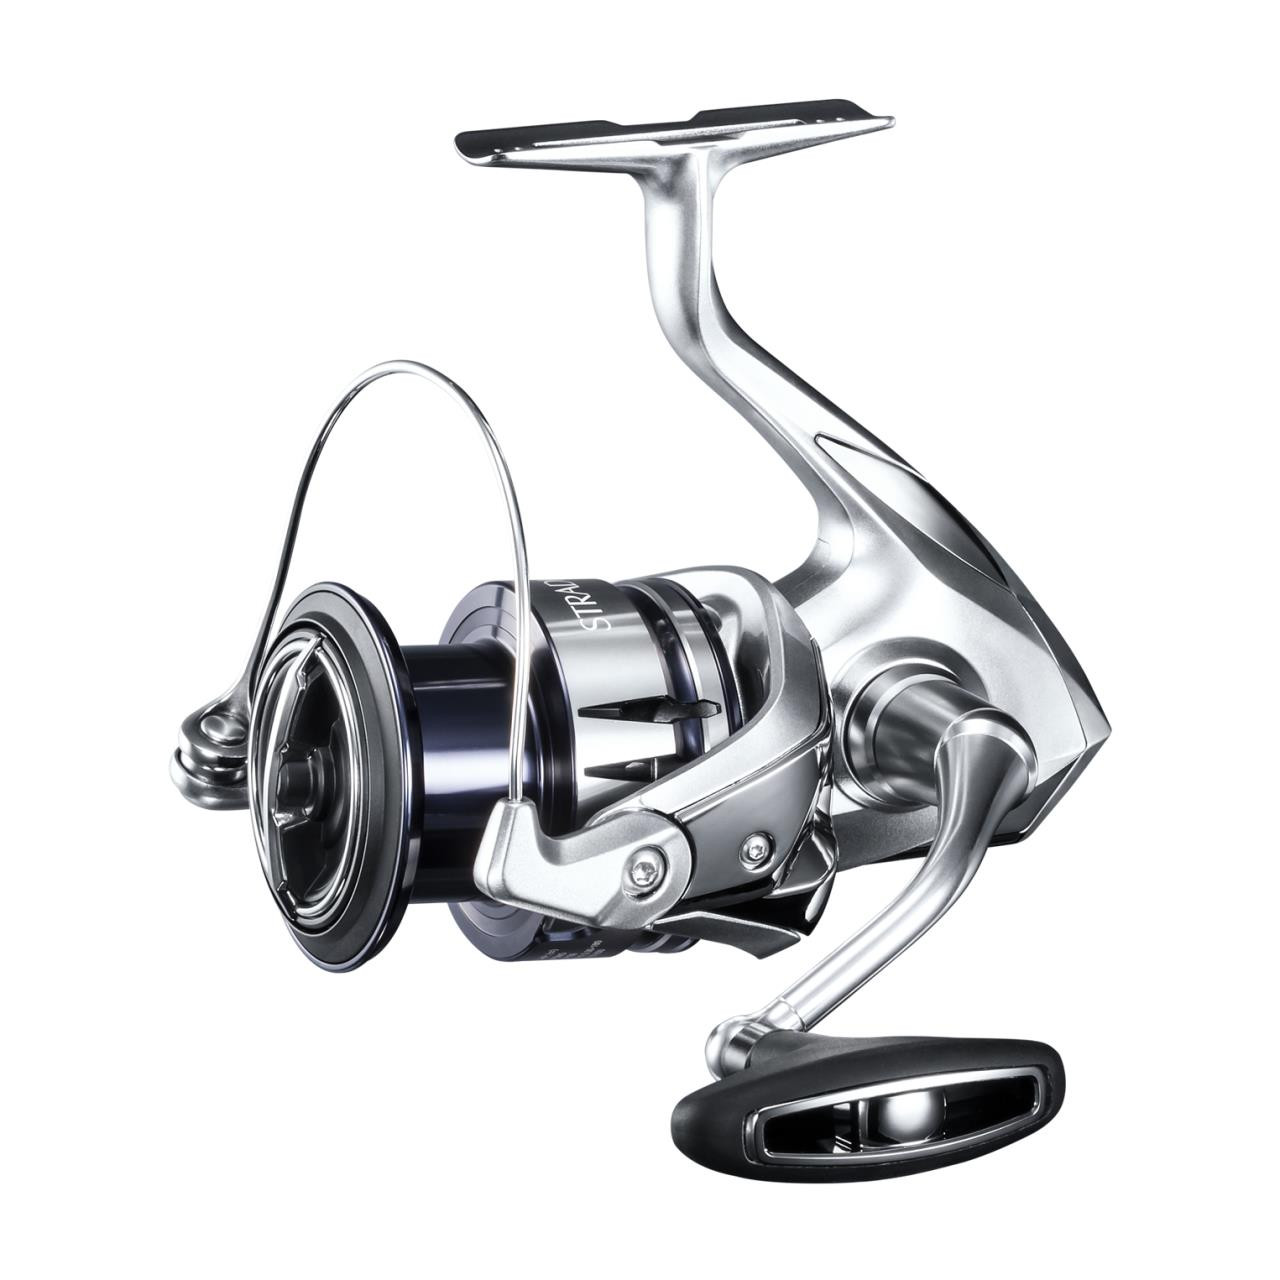 https://cdn11.bigcommerce.com/s-0xmhwue6/images/stencil/1280x1280/products/18049/39519/Shimano-Stradic-FL-Spinning-Reel-Silver-6-0-1-022255230759_image1__61468.1648152574.jpg?c=2